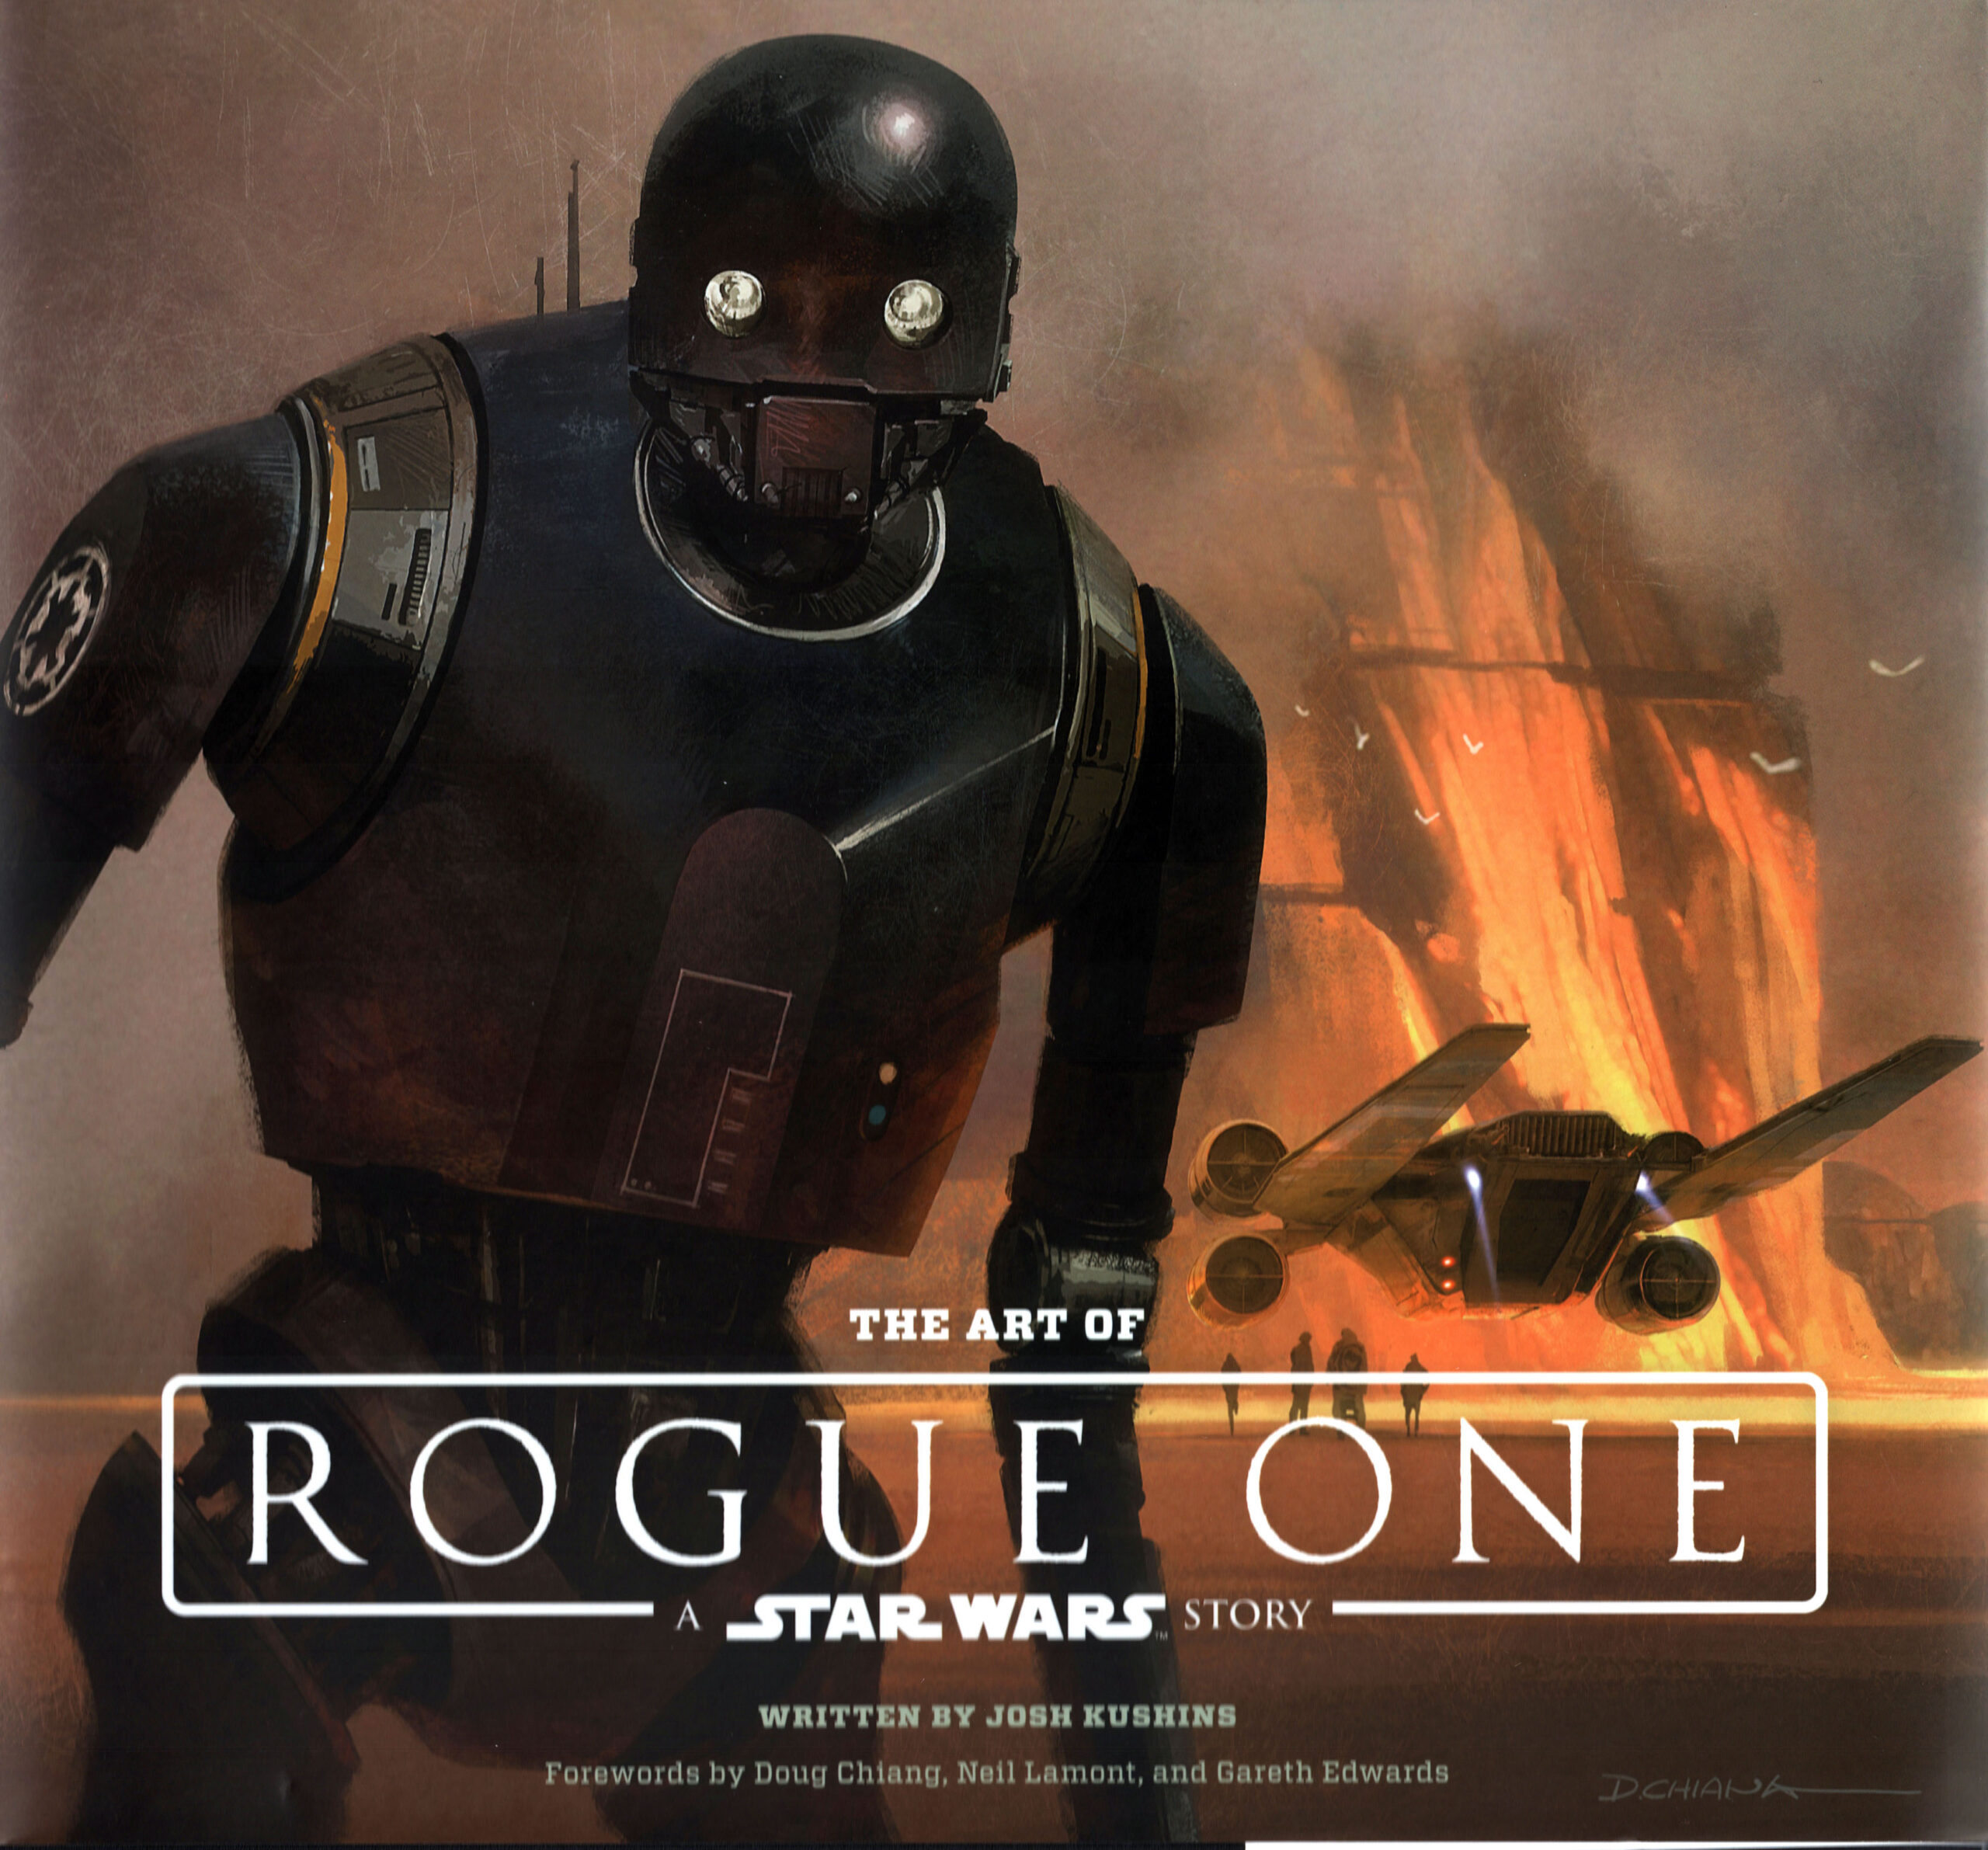 The Art of Rogue One – A Star Wars Story